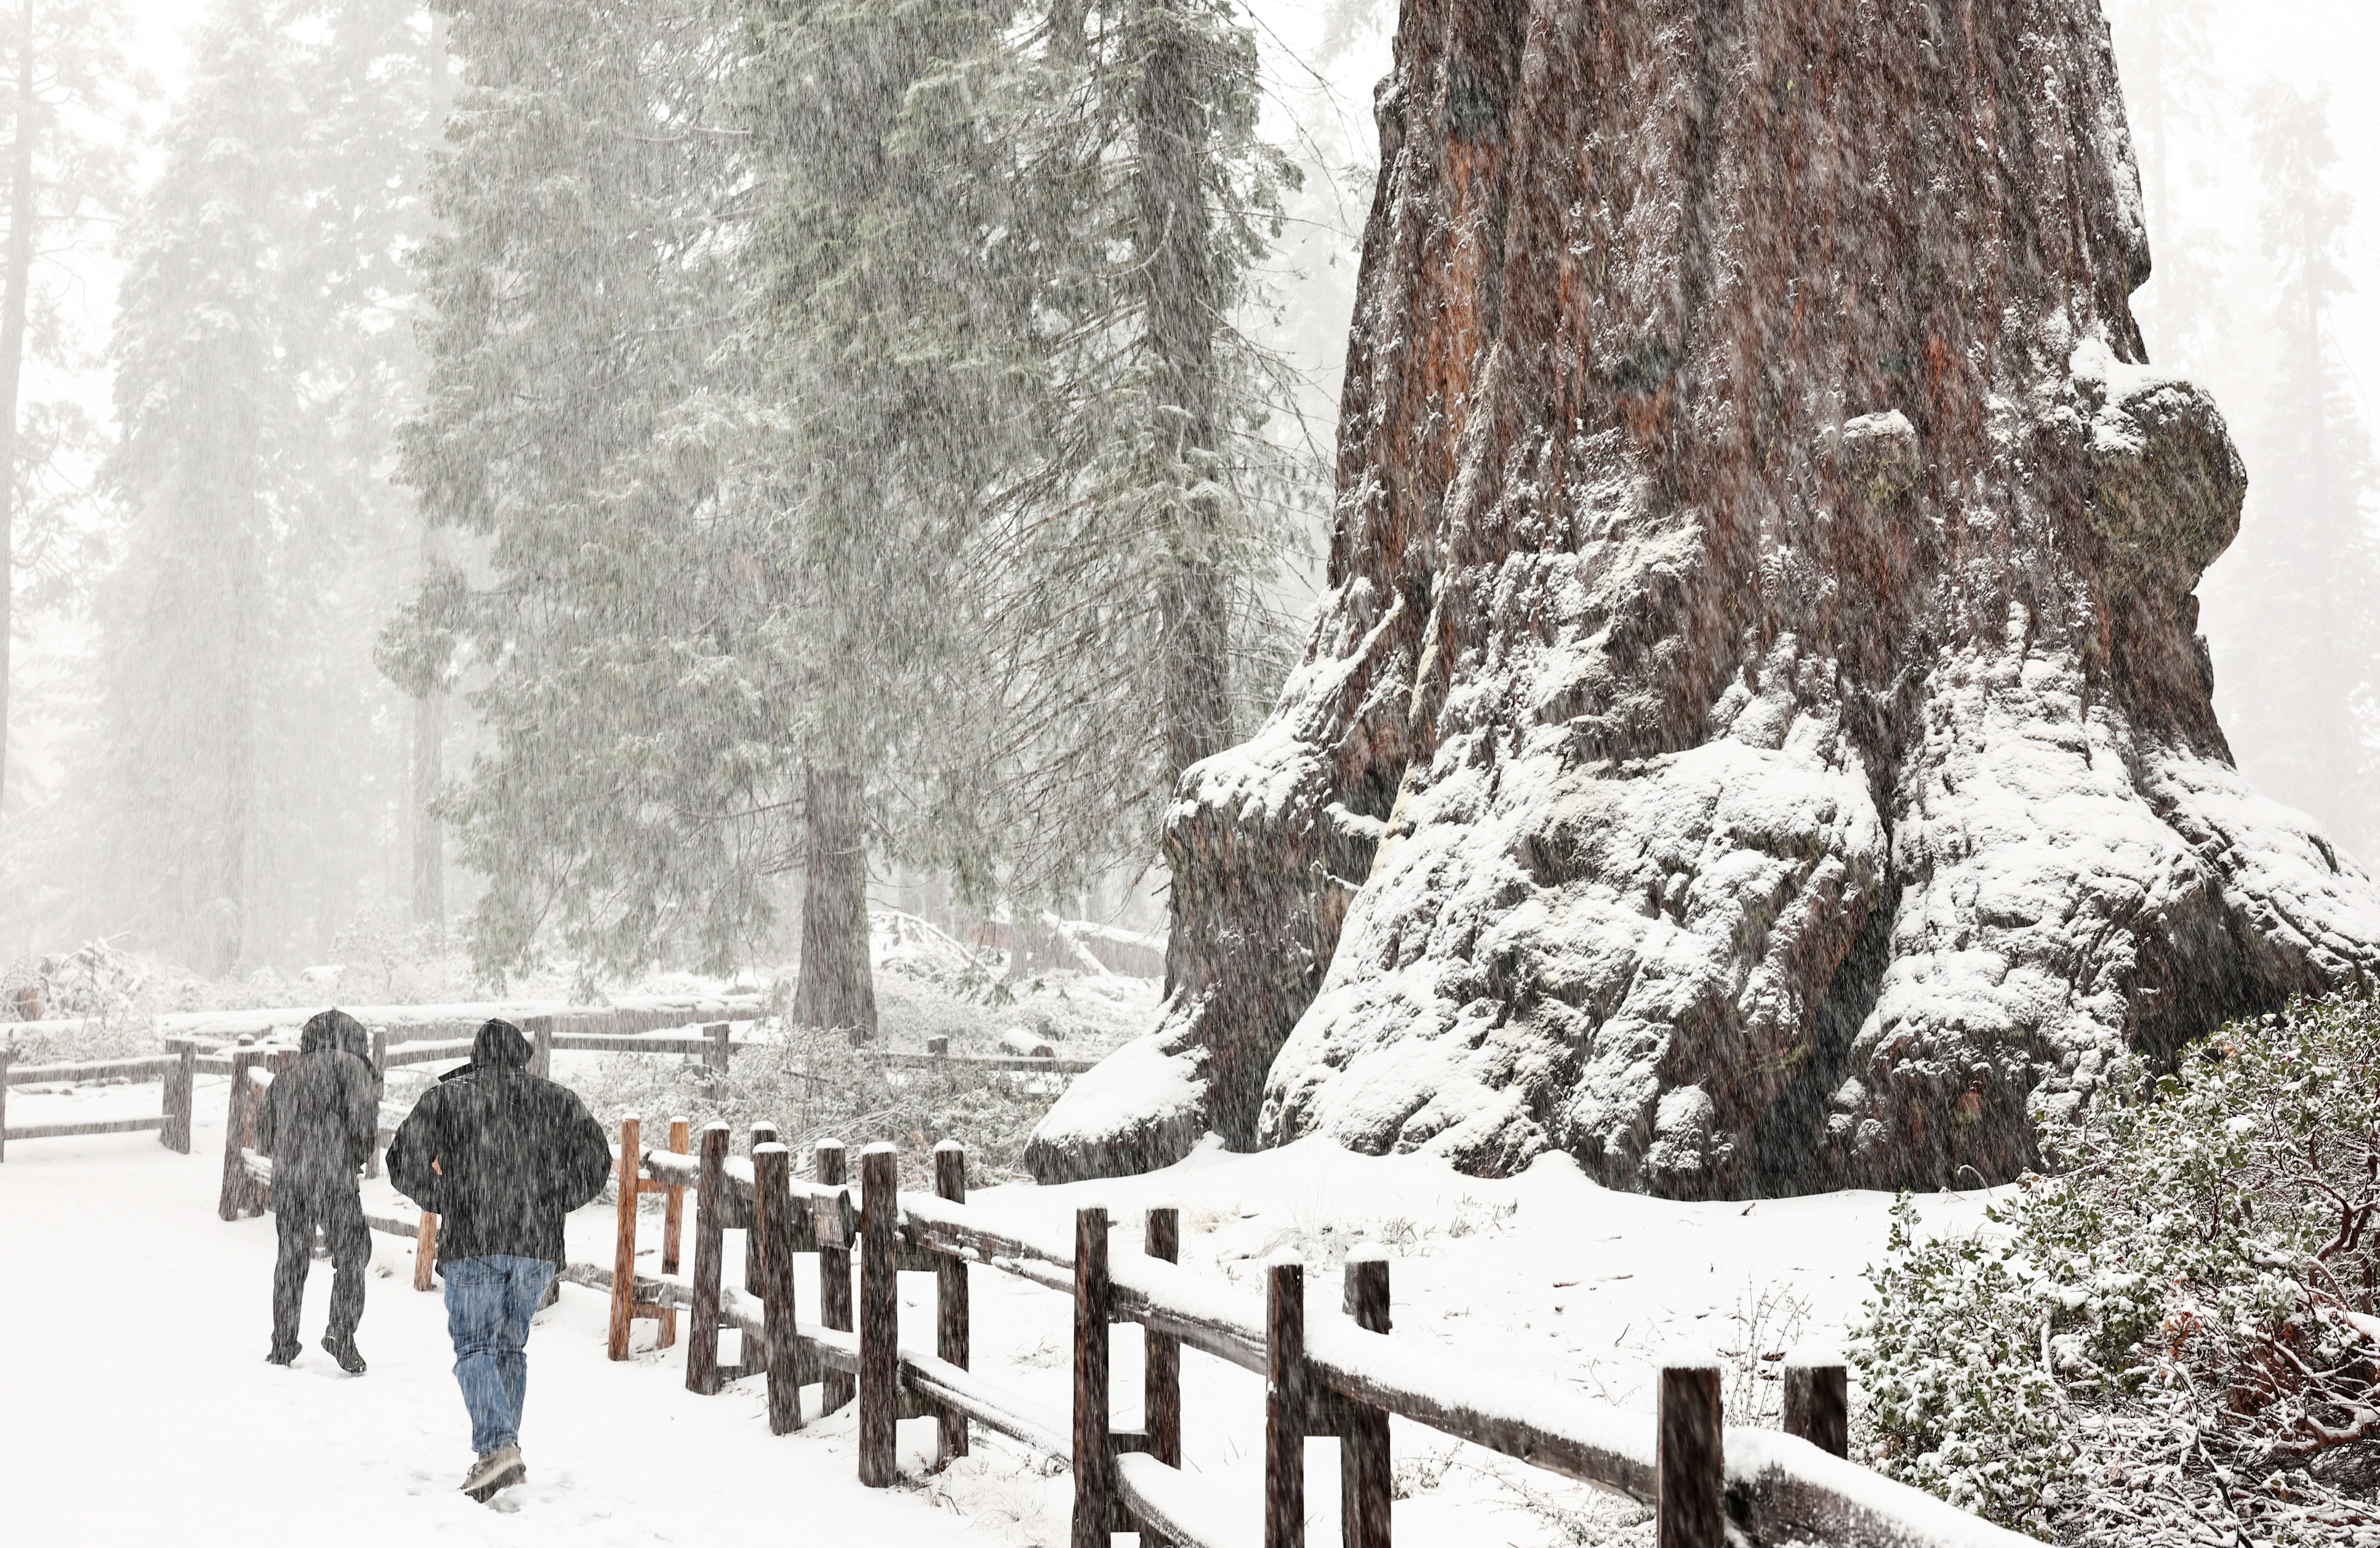 Visitors walk by giant sequoias as snow falls during an atmospheric river storm in Kings Canyon National Park in California on February 1.